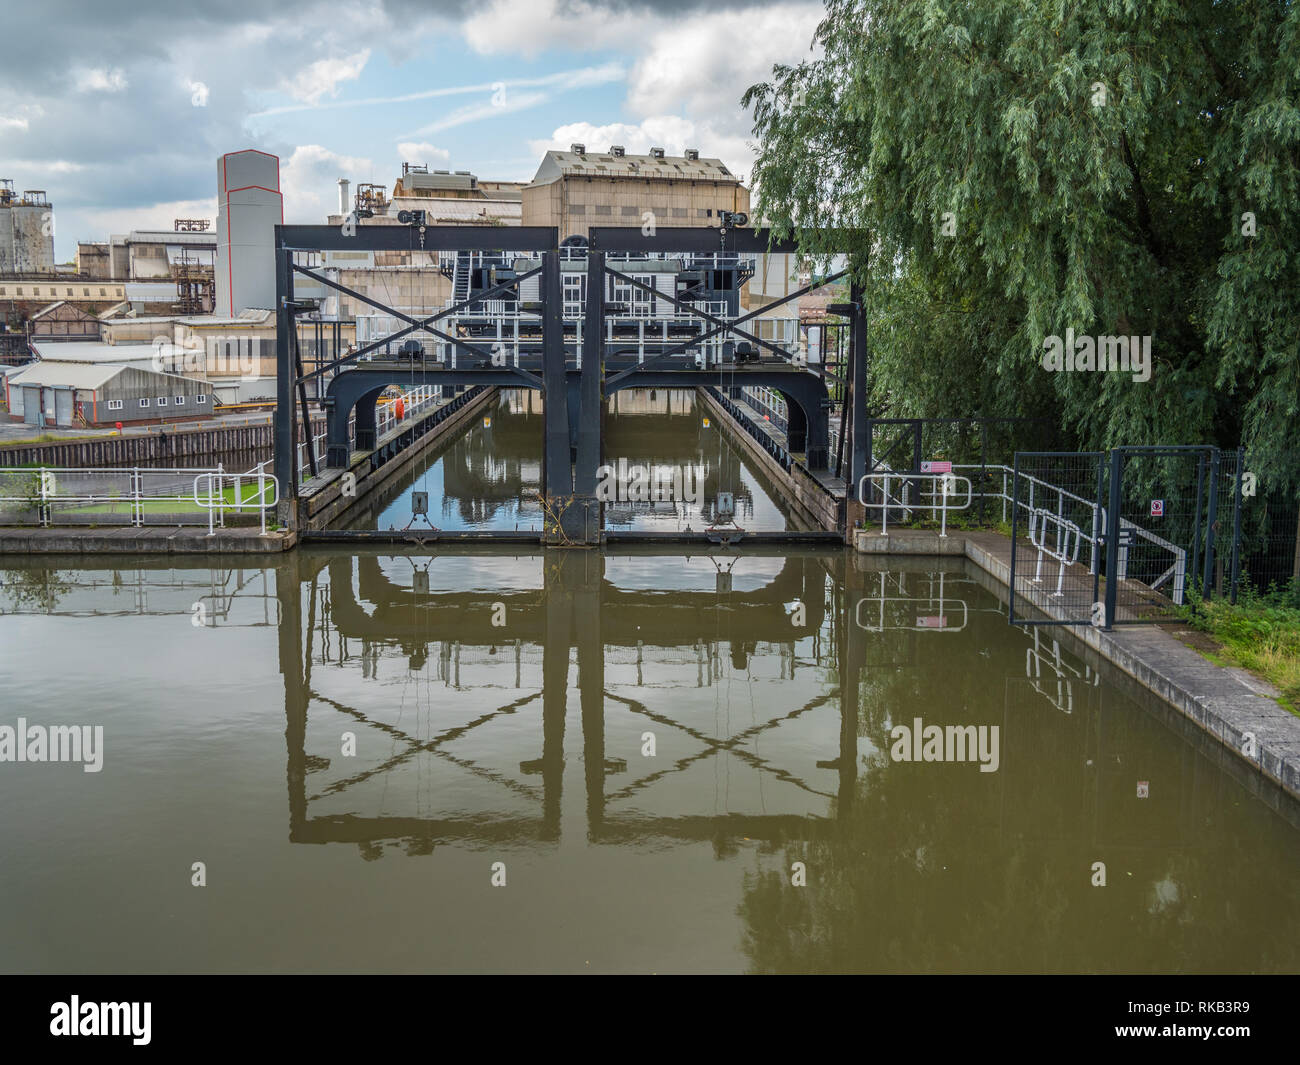 Anderton Boat Lift is a 2 caisson lift lock. Providing a 50-foot vertical link between 2 navigable waterways; River Weaver and Trent and Mersey Canal. Stock Photo